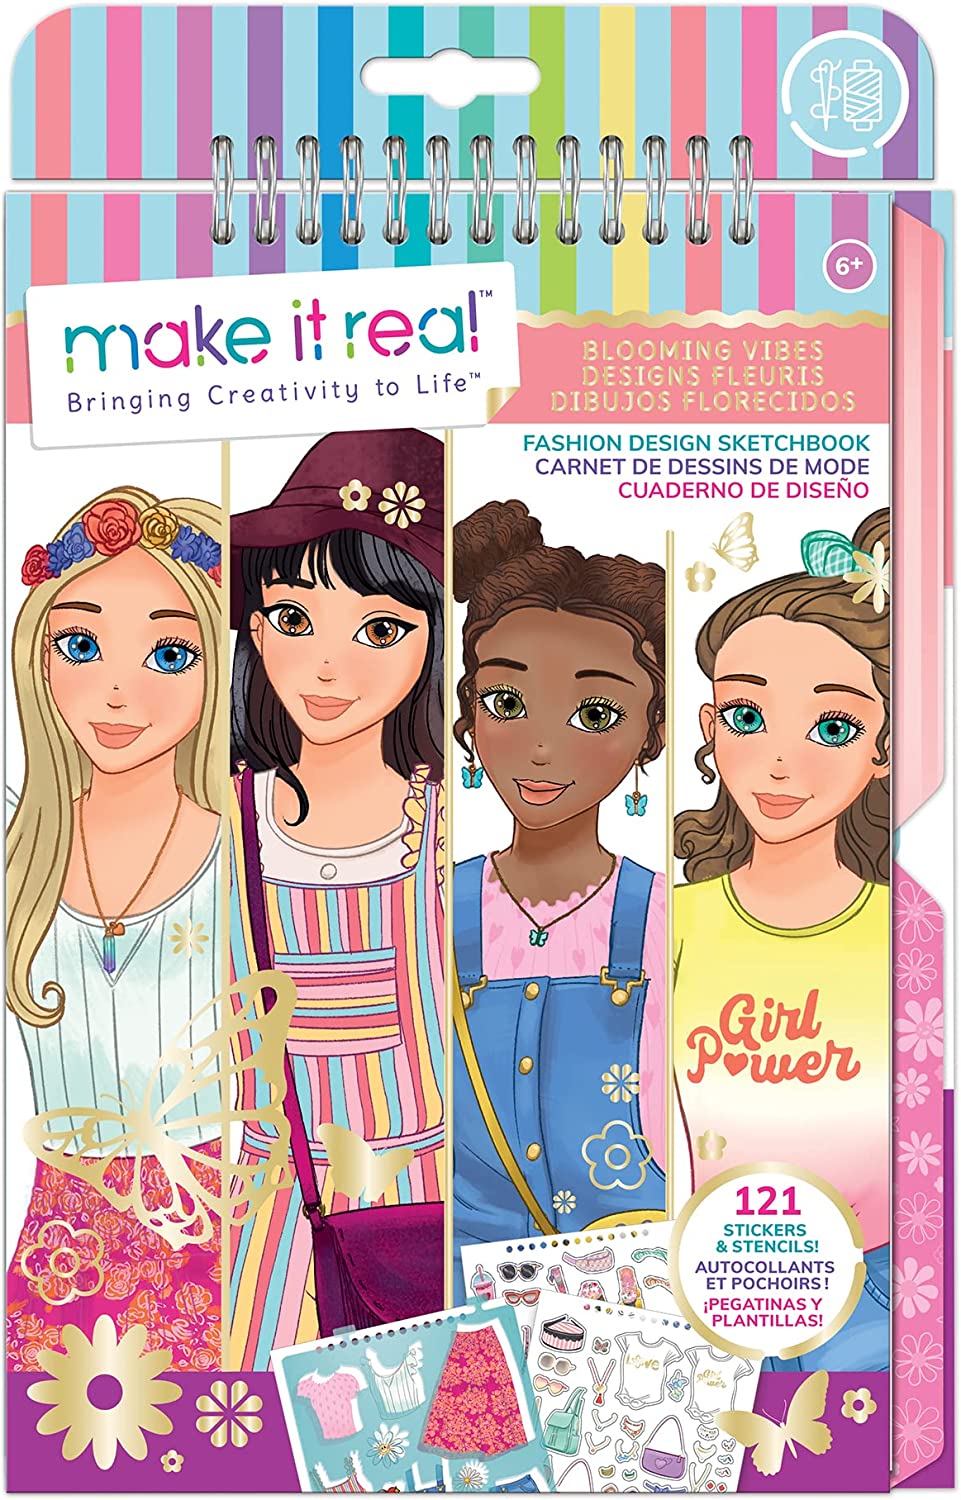 Make It Real Love and Daisy Inspired Fashion Design Sketchbook